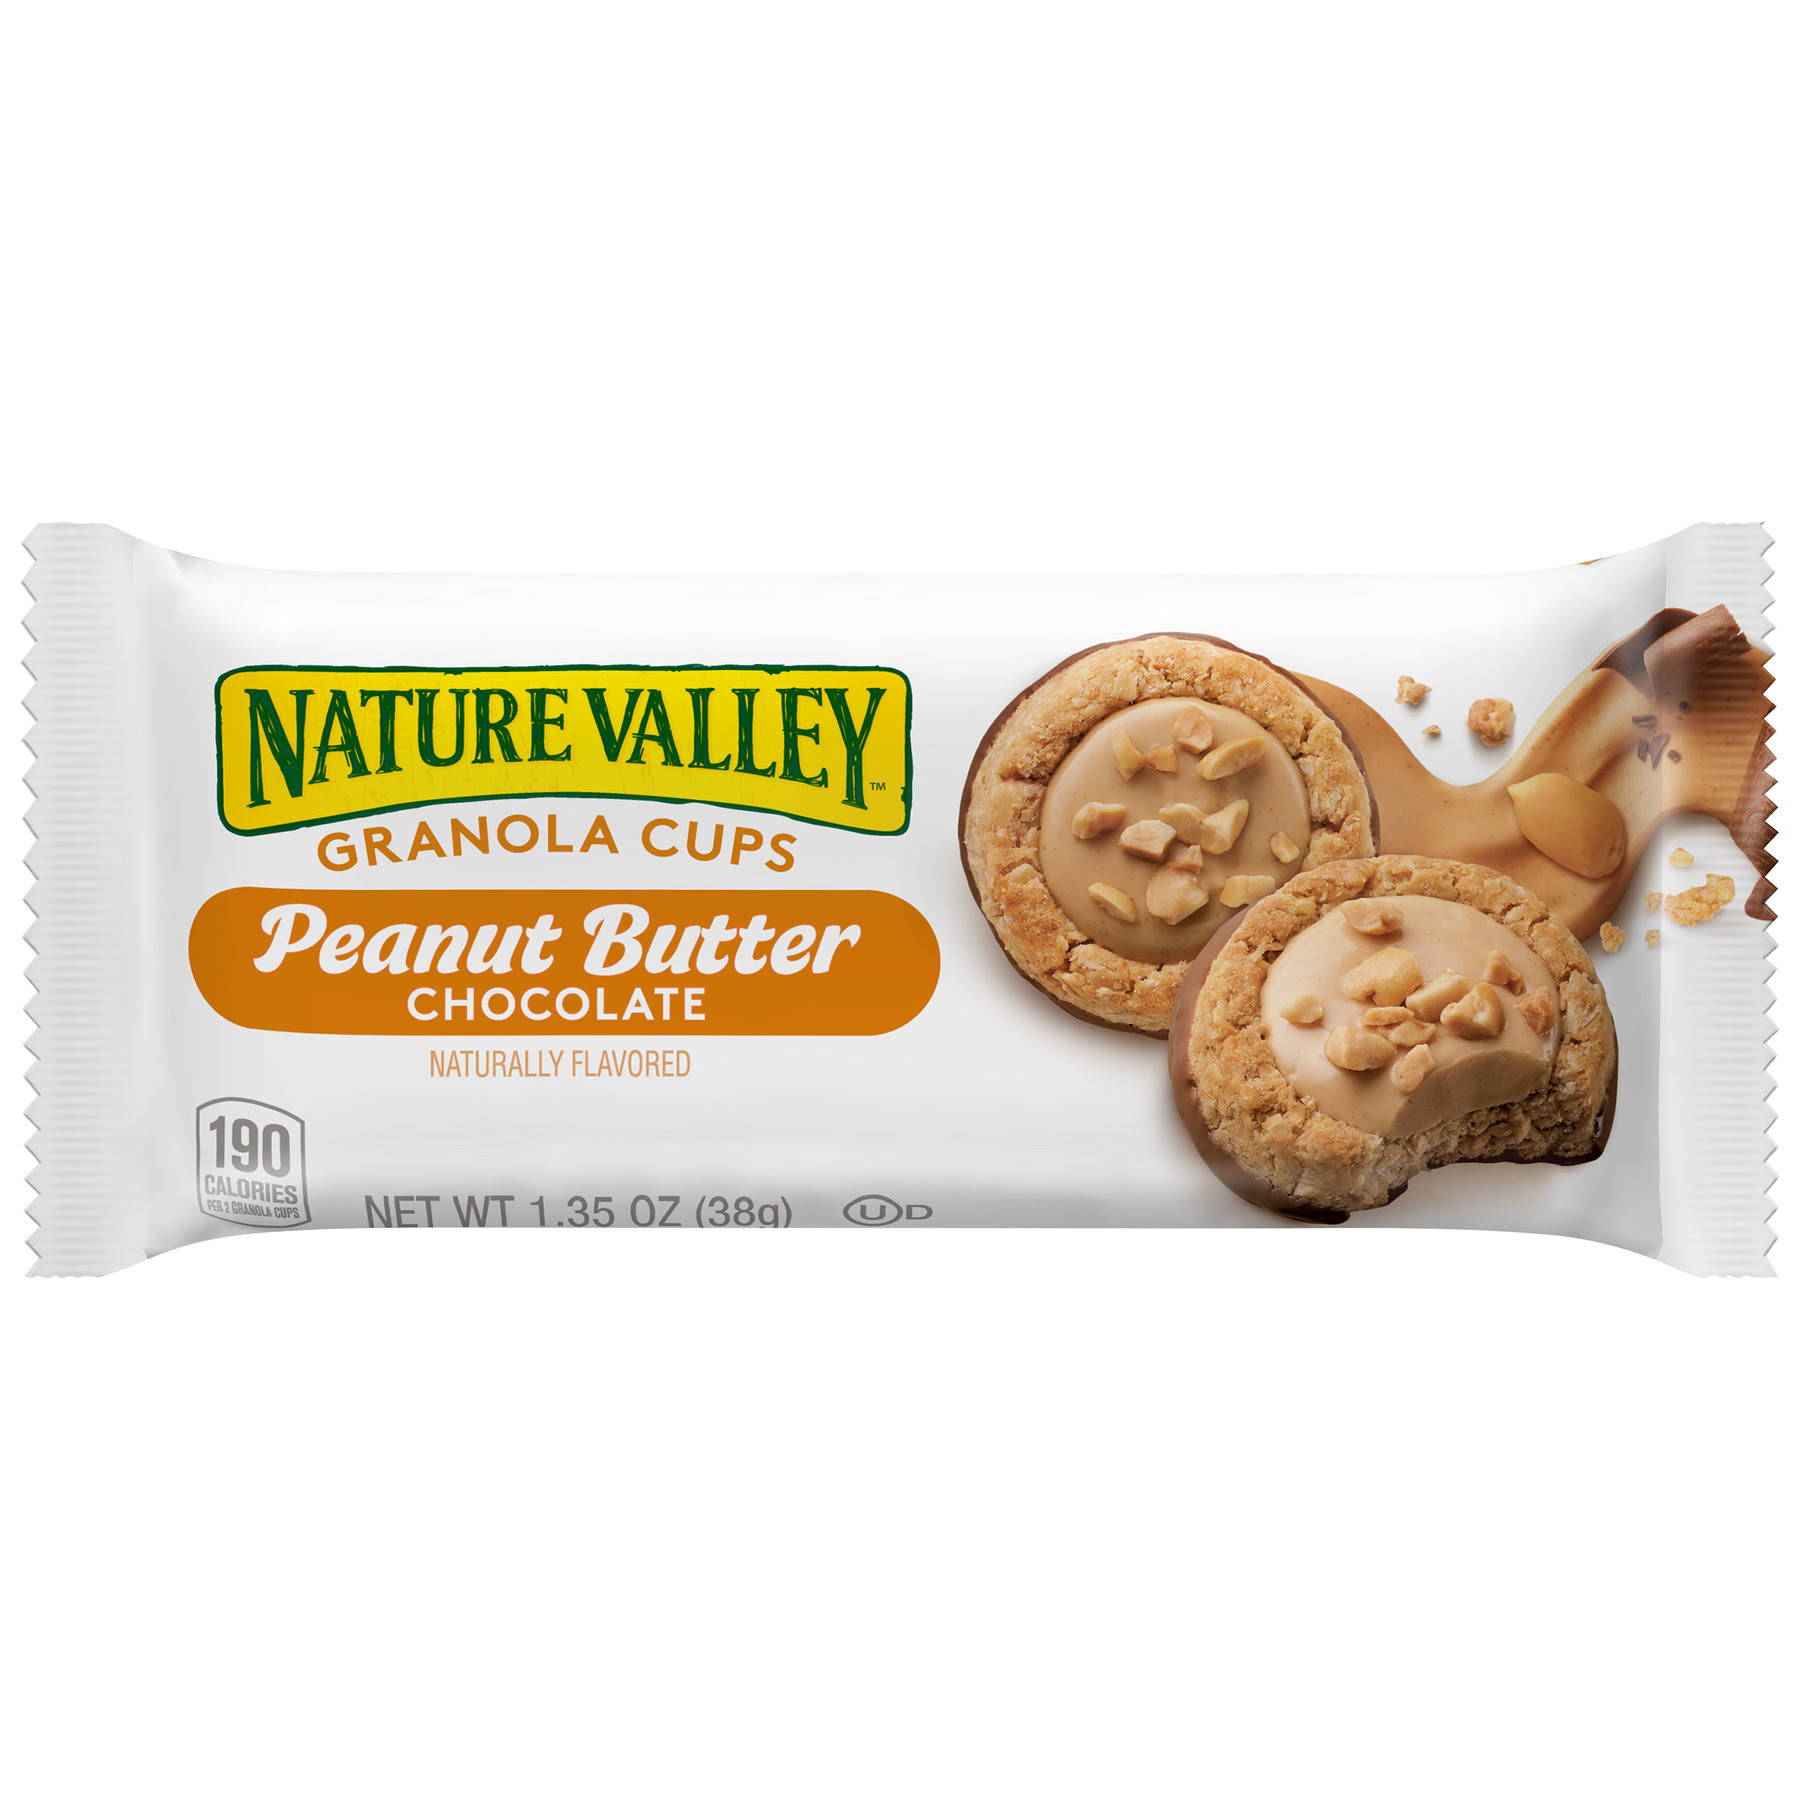 Nature Valley Granola Cups, Peanut Butter Chocolate - 1.35 oz